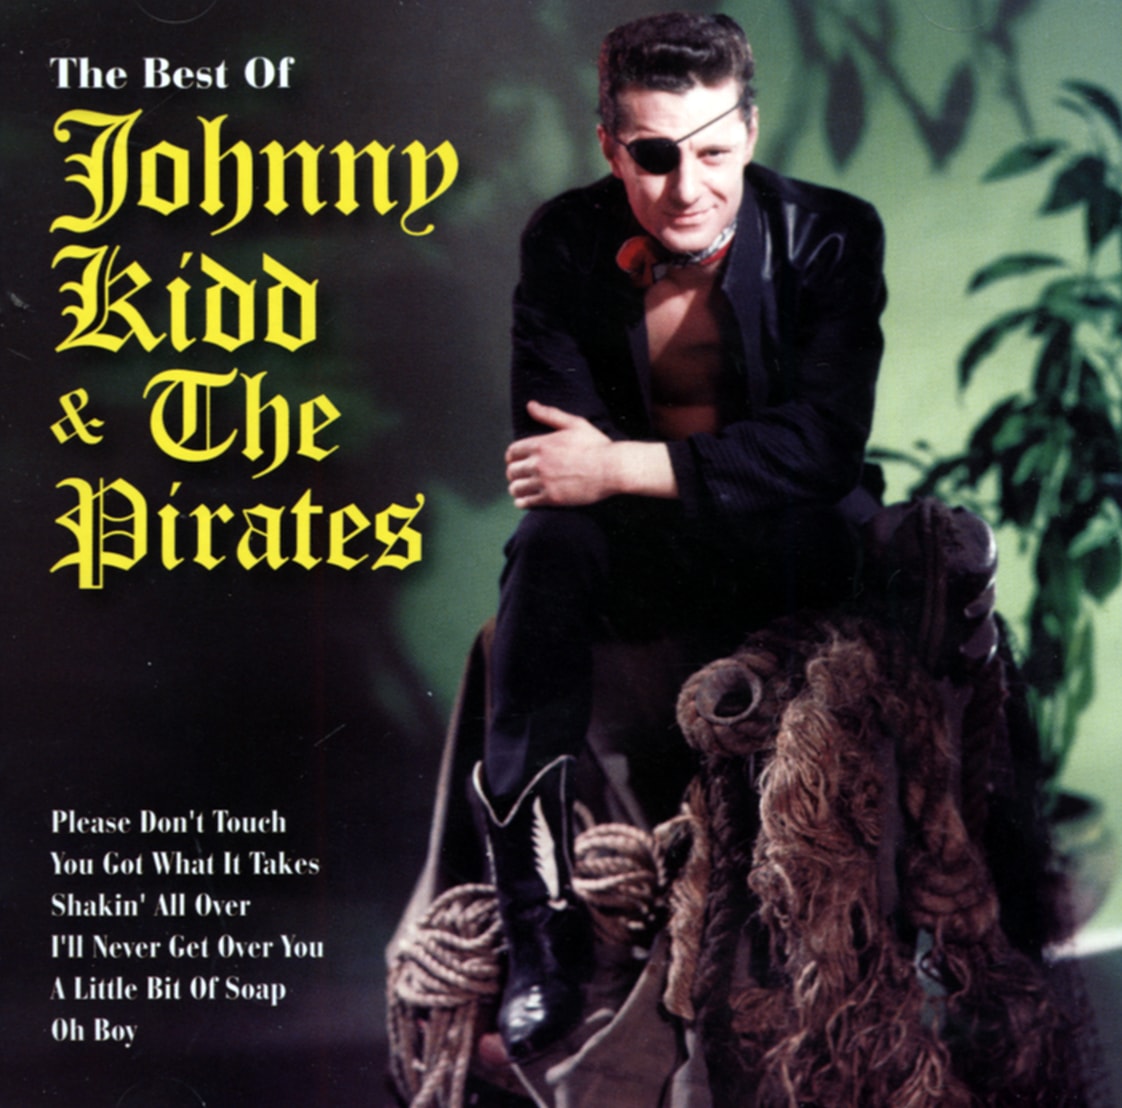 Johnny Kidd & The Pirates CD: The Best Of Johnny Kidd & The Pirates (2 ...